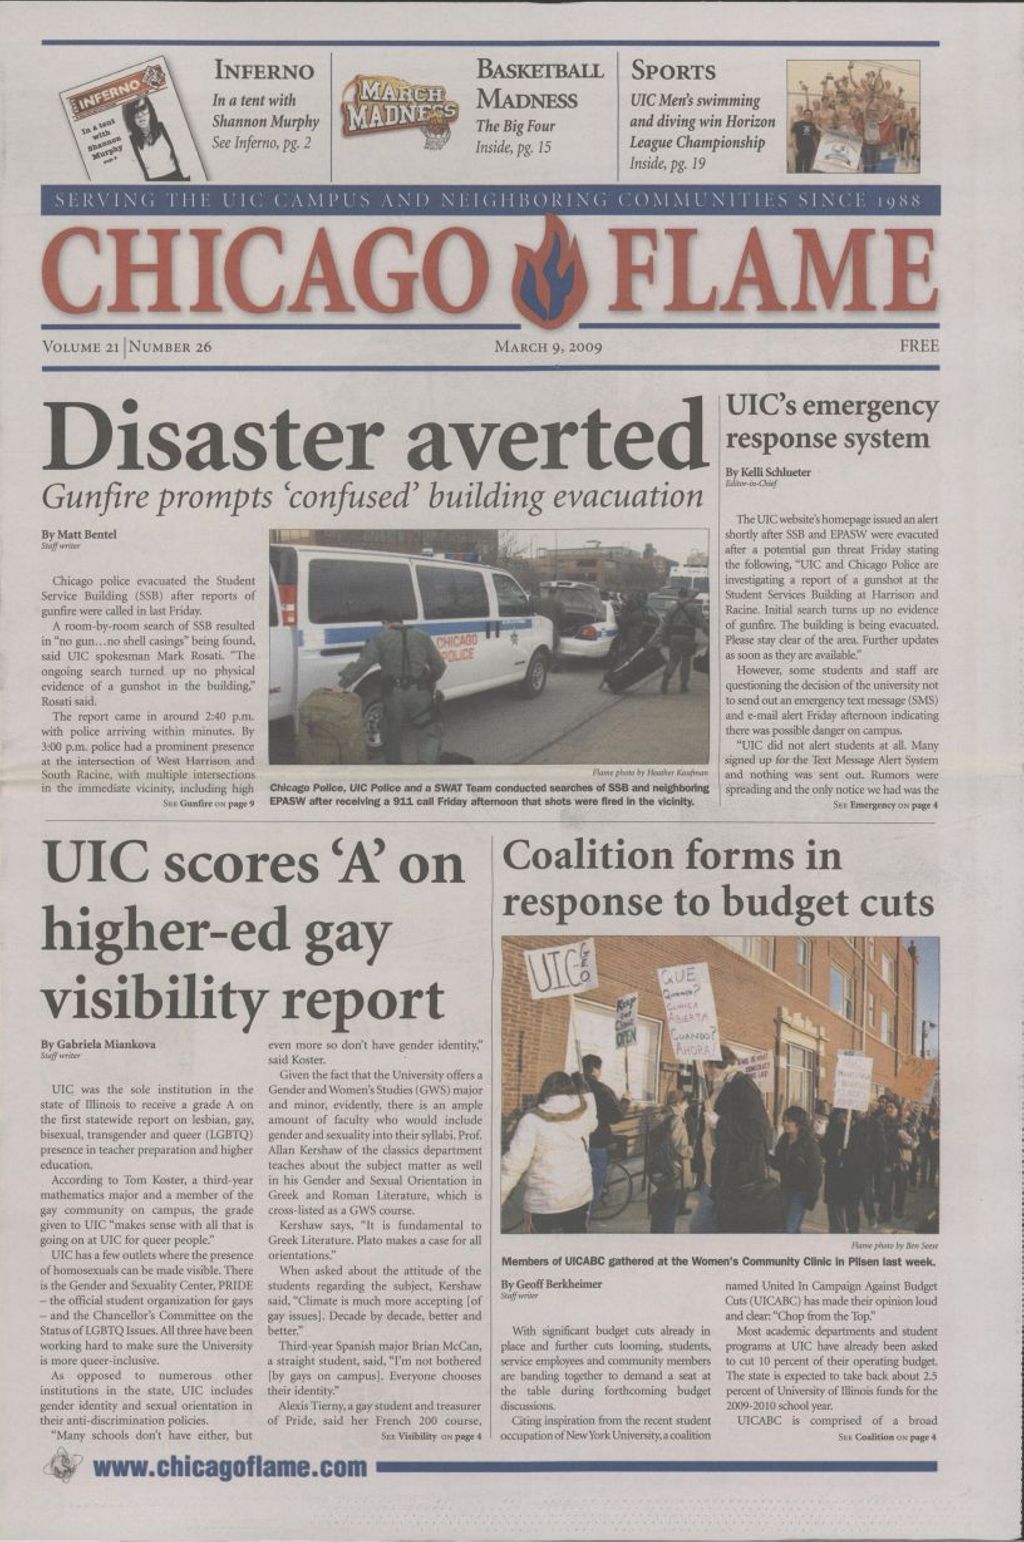 Miniature of Chicago Flame (March 9, 2009)